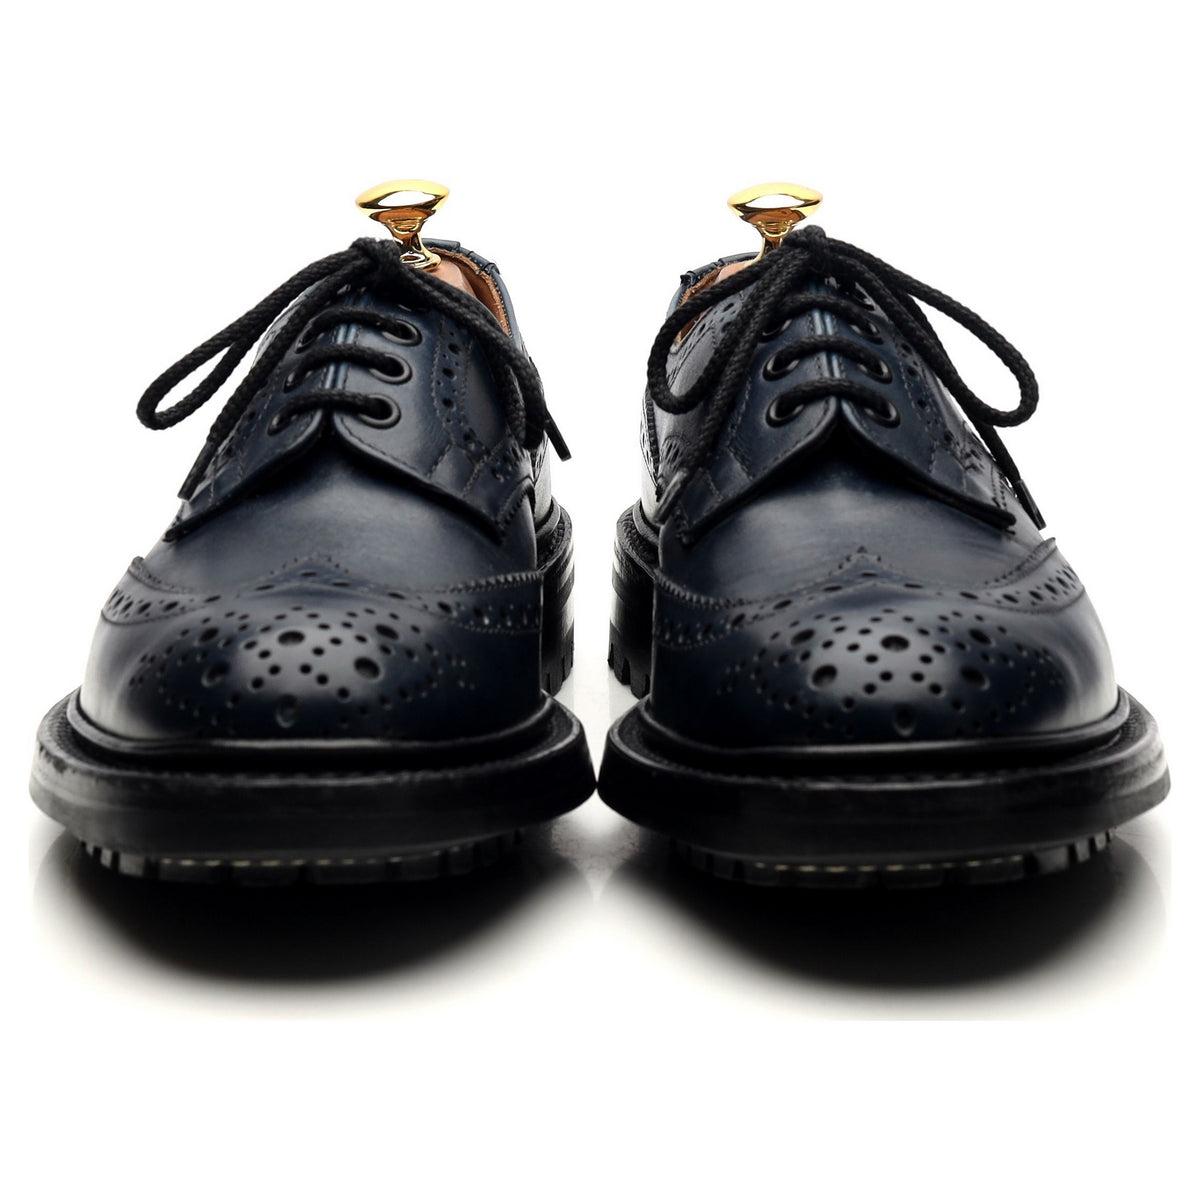 &#39;Bourton&#39; Navy Blue Leather Derby Brogues UK 6